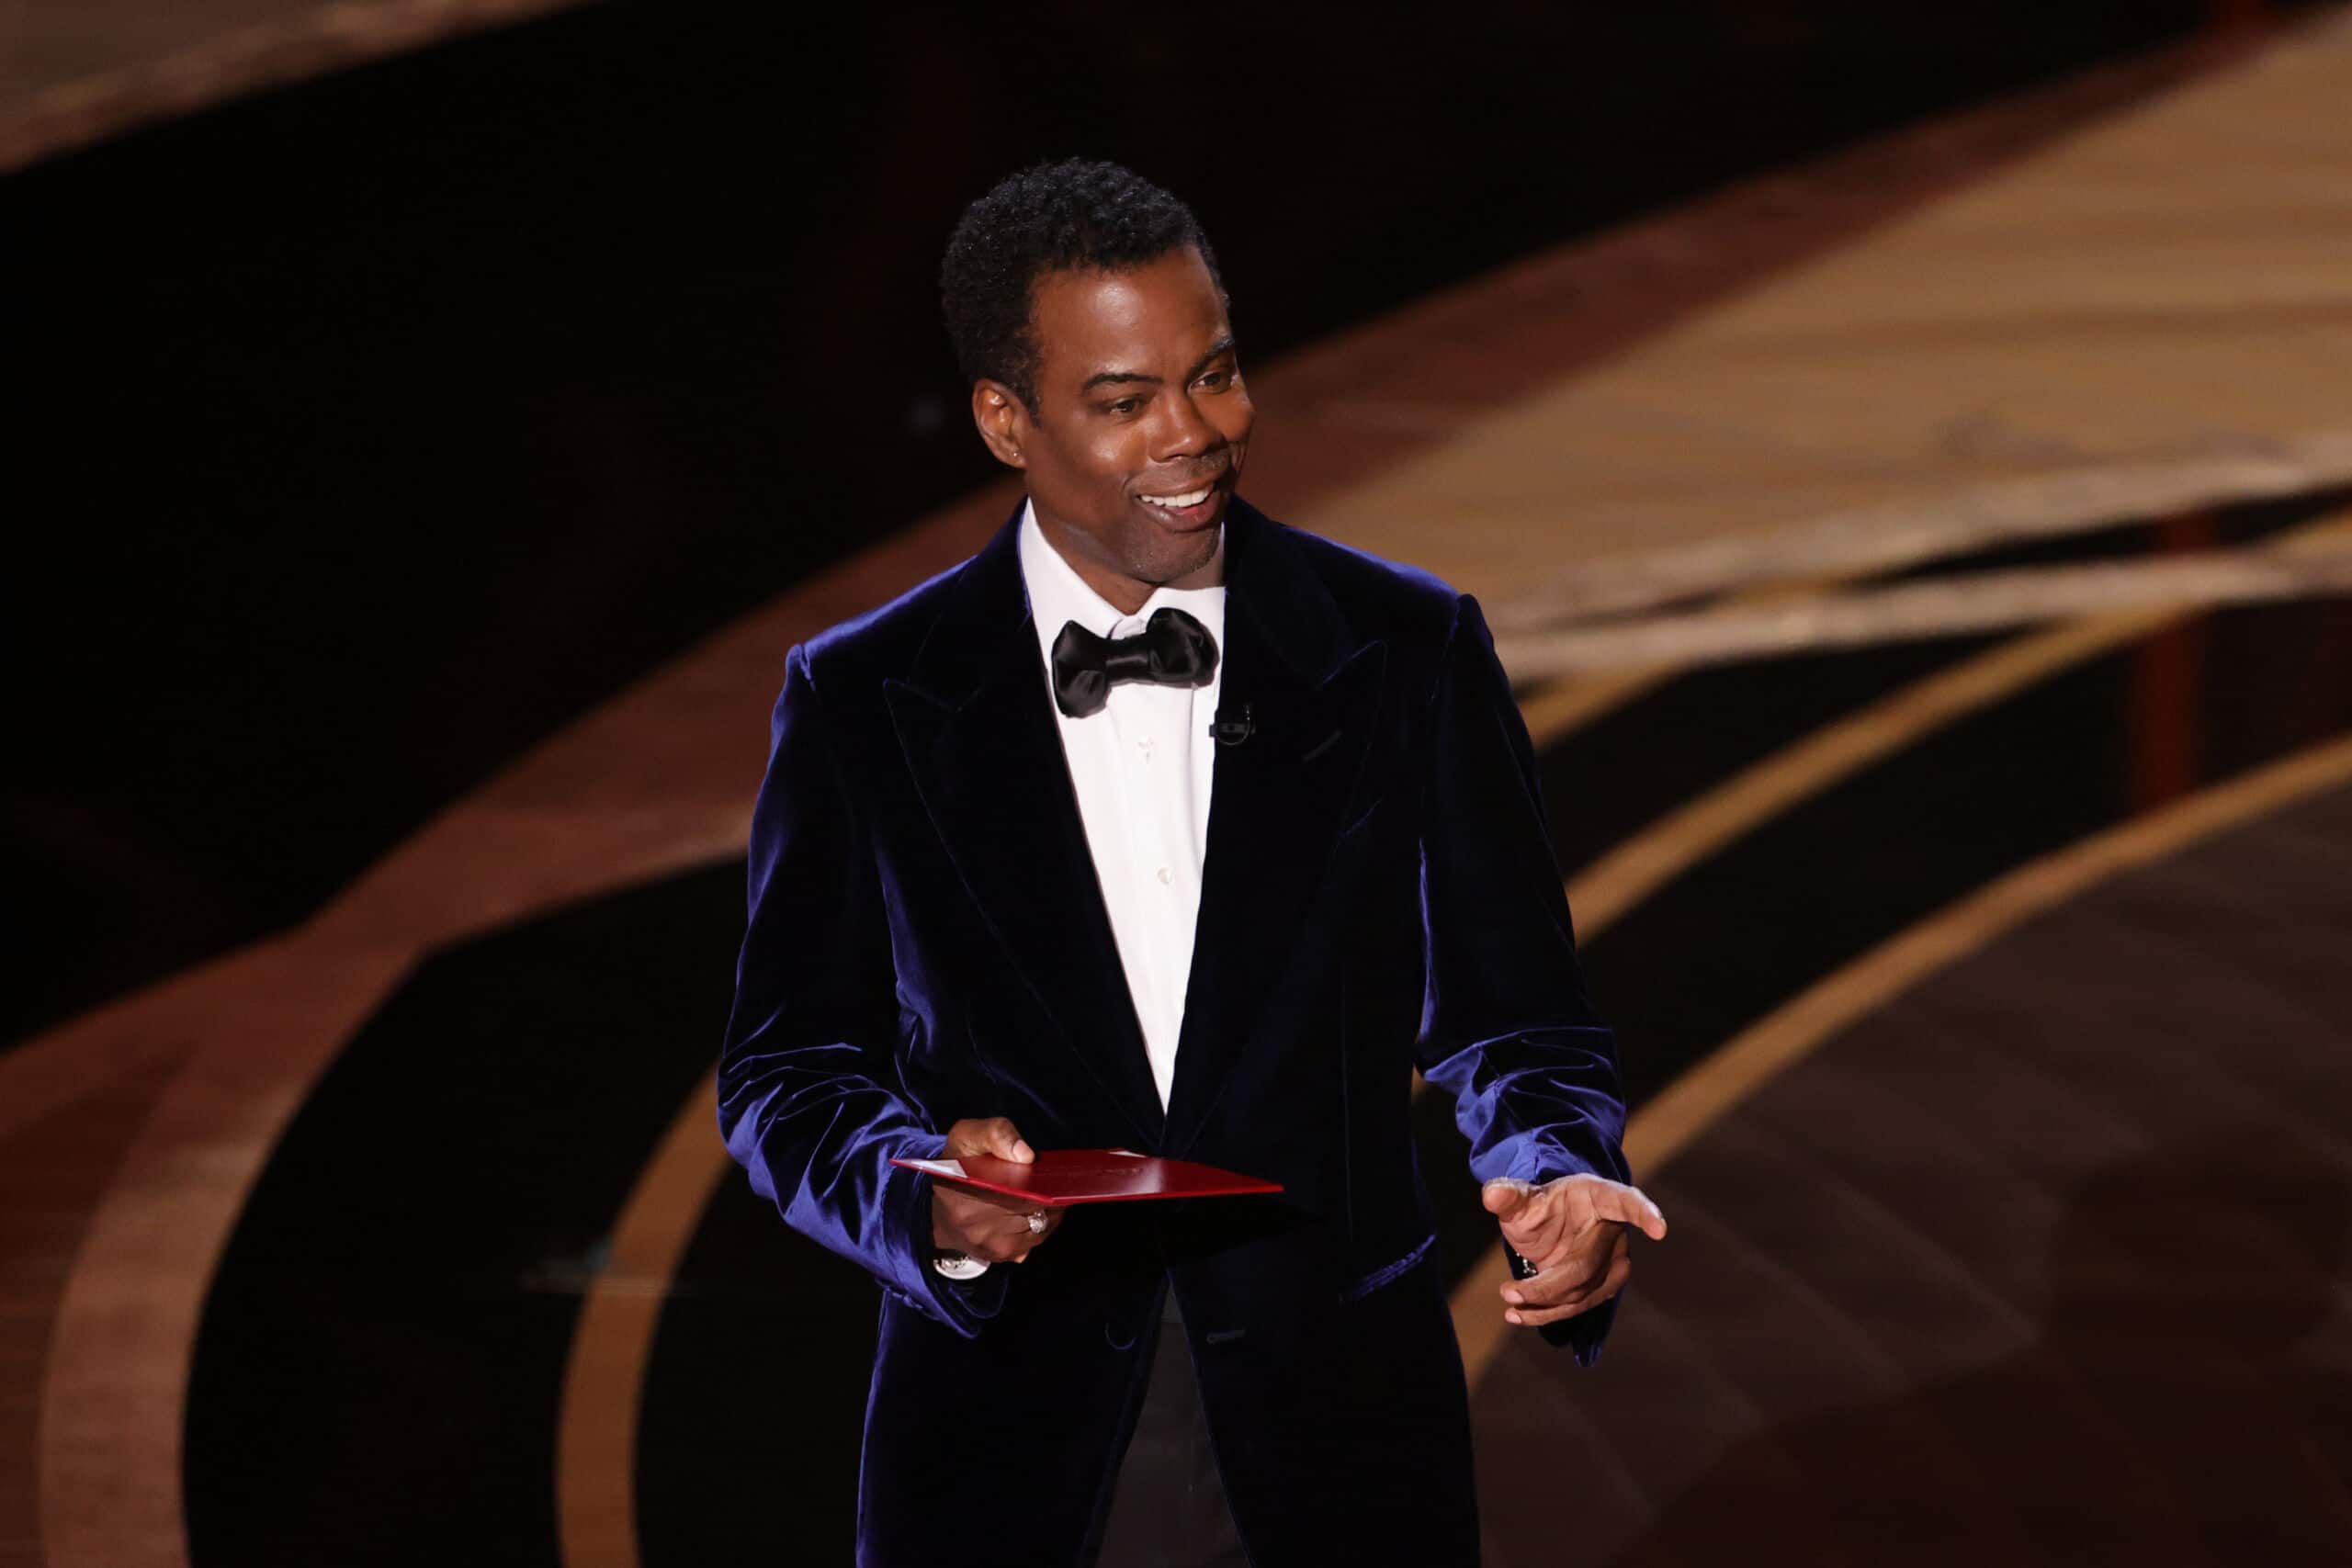 Chris Rock Reportedly 'Frustrated' About Jada Pinkett Smith's Drama